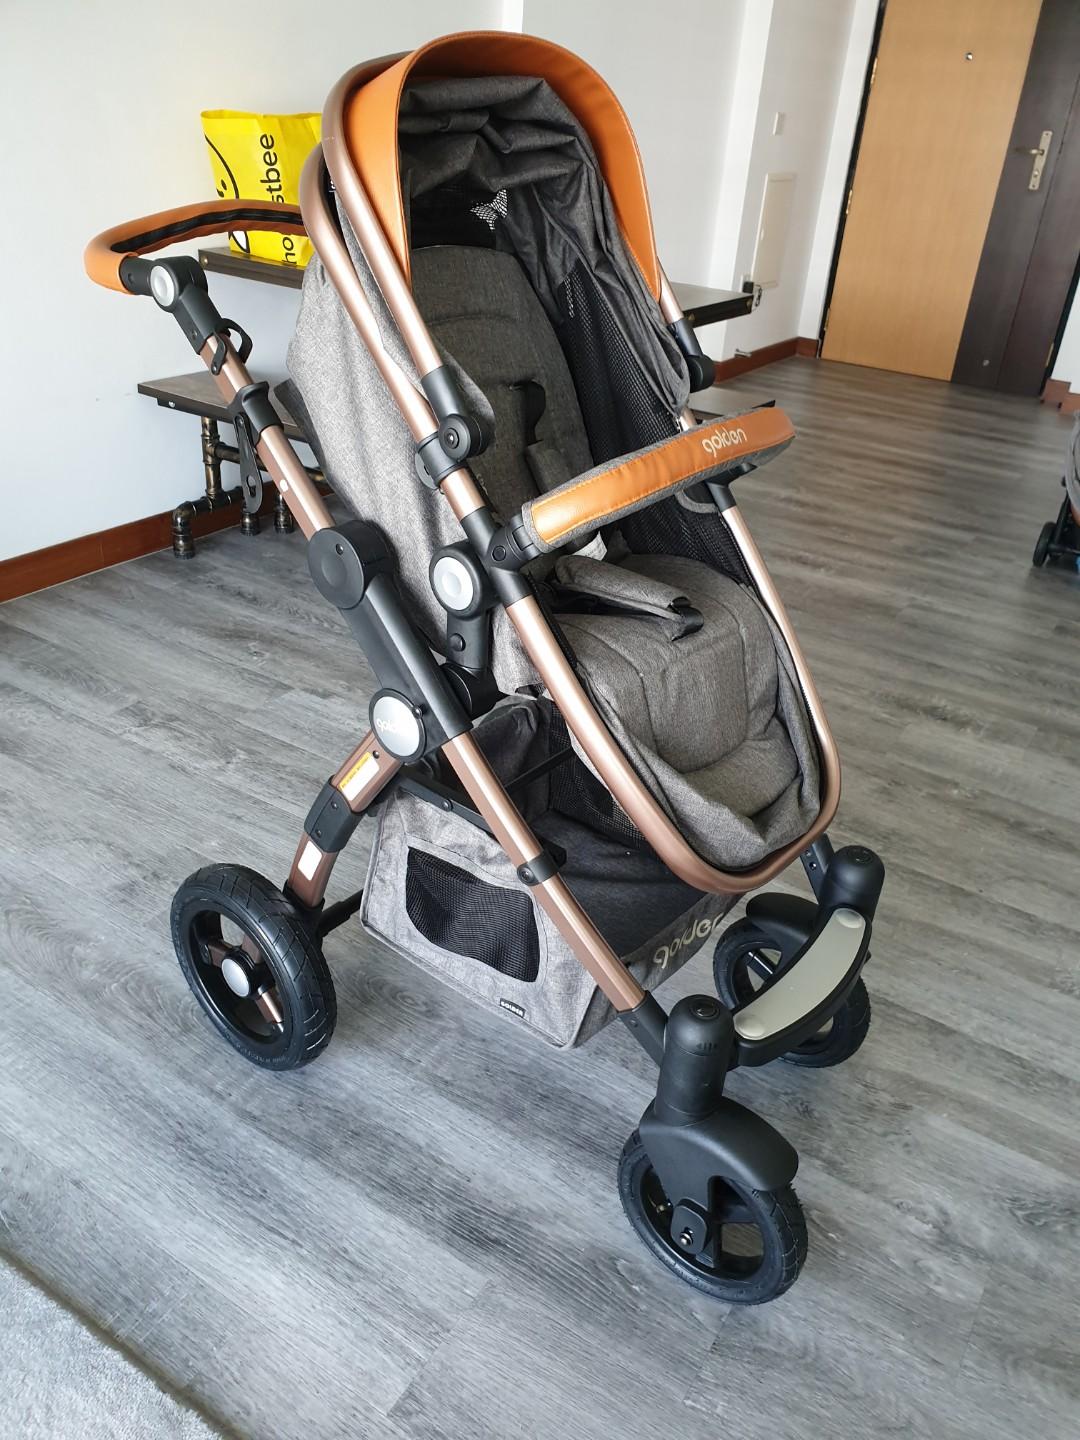 european style baby carriage